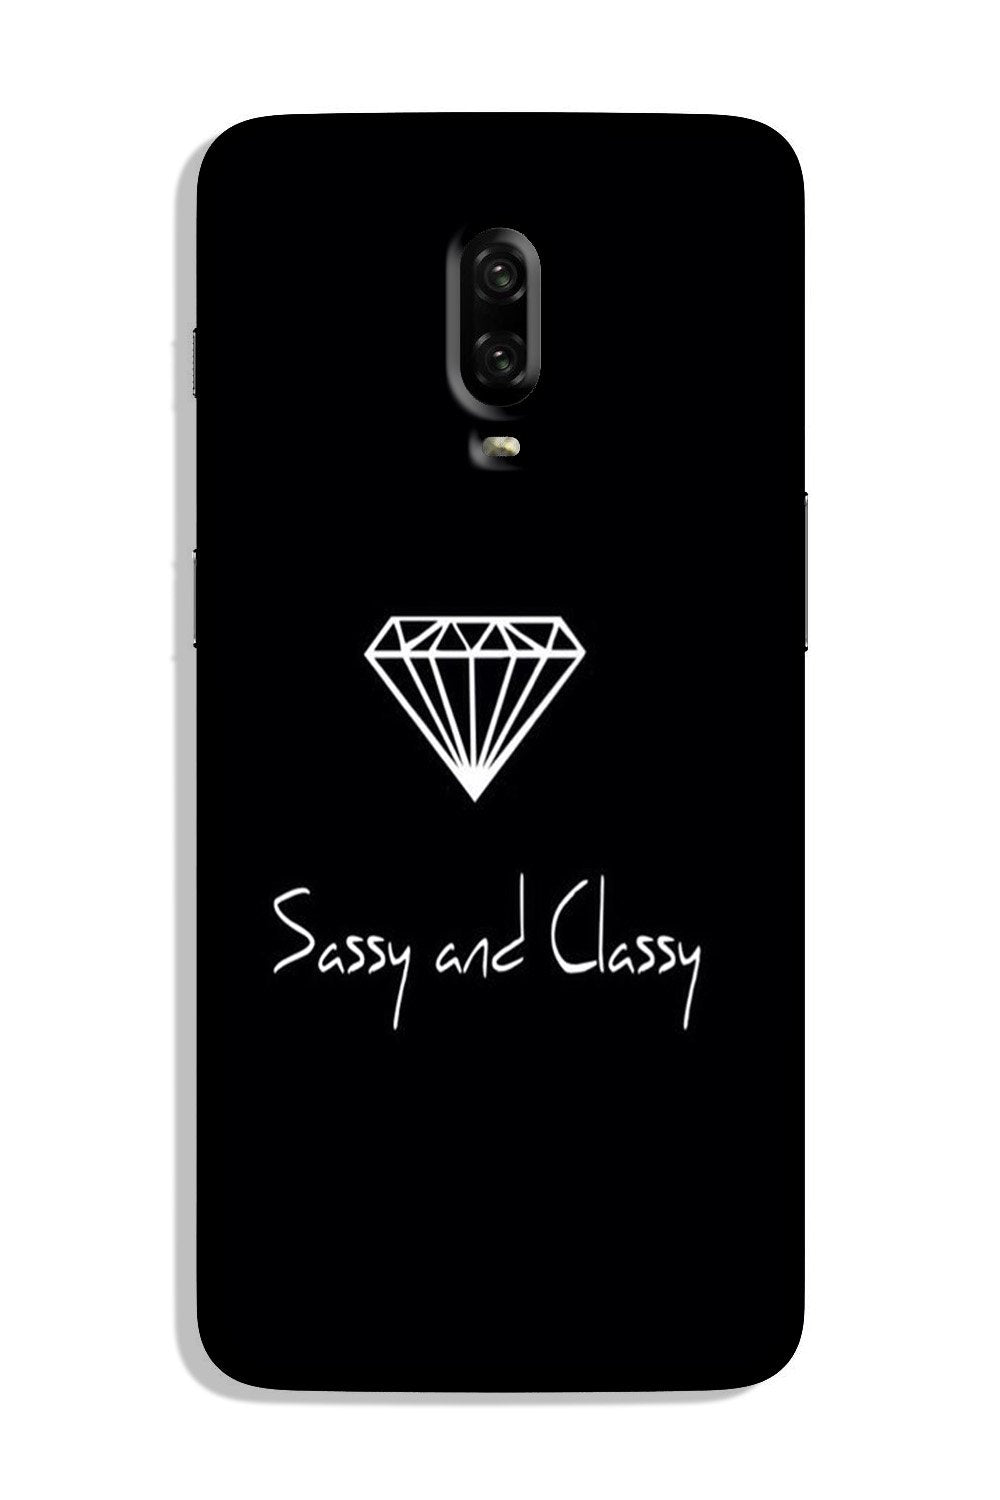 Sassy and Classy Case for OnePlus 6T (Design No. 264)